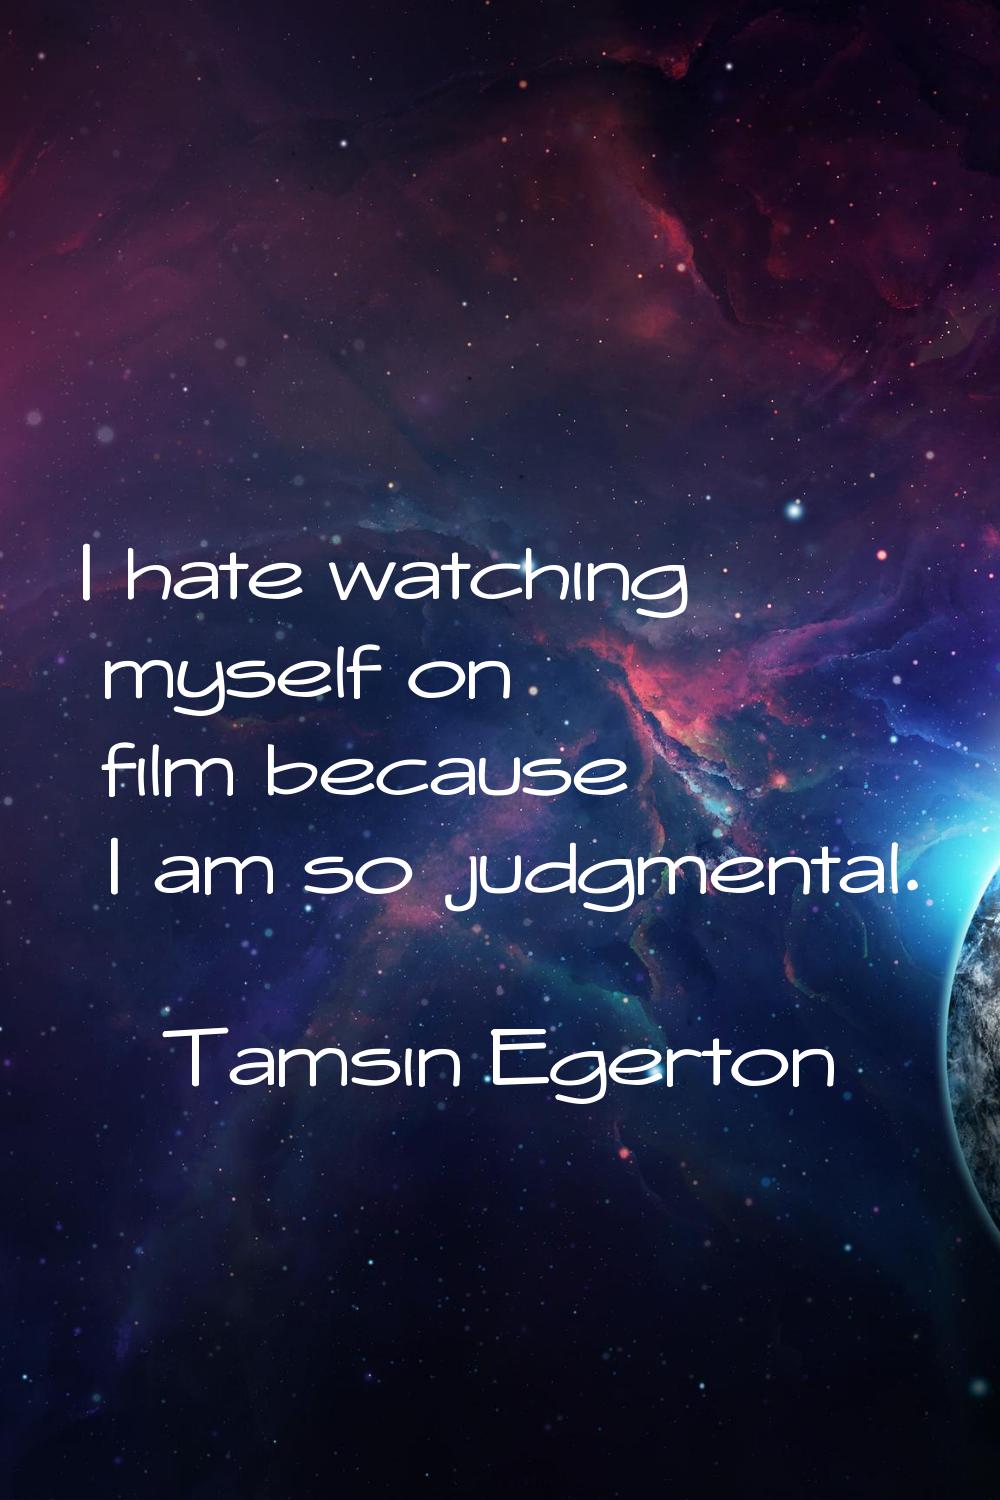 I hate watching myself on film because I am so judgmental.